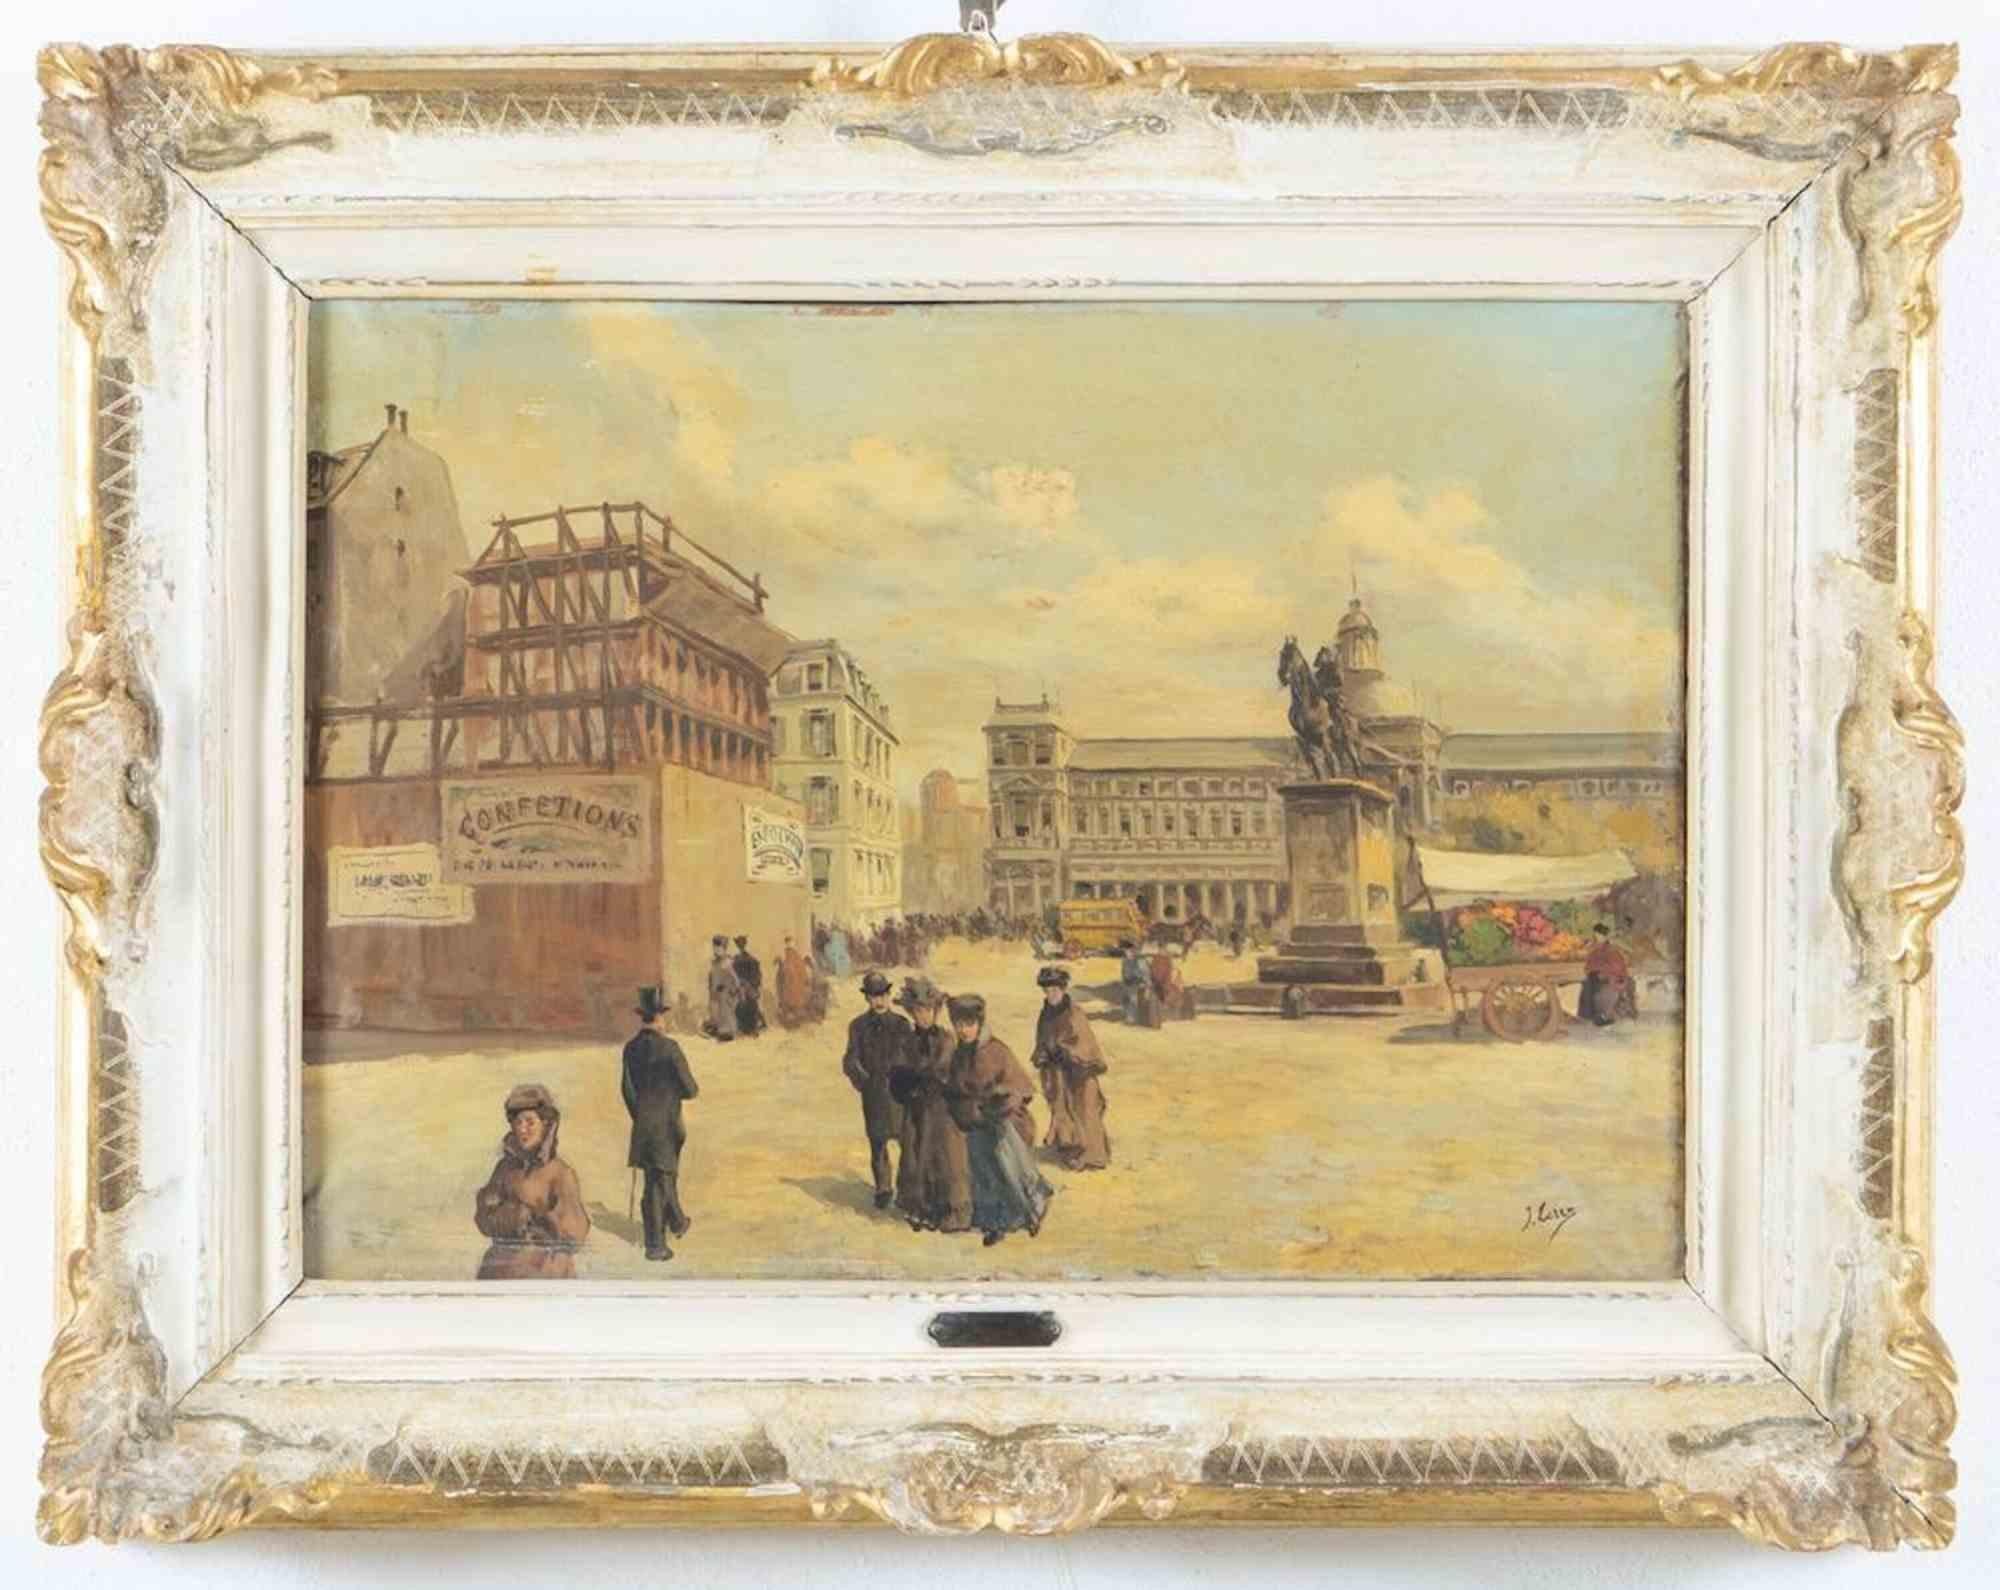 Vieielle France is an original oil painting on canvas realized by Jean Lereu, in the late 19th century. 

Hand-signed in the lower right margin.

49.5x69 cm with frame. 

Good conditions.

Jean Lereu, a landscape painter of the late XIX century,